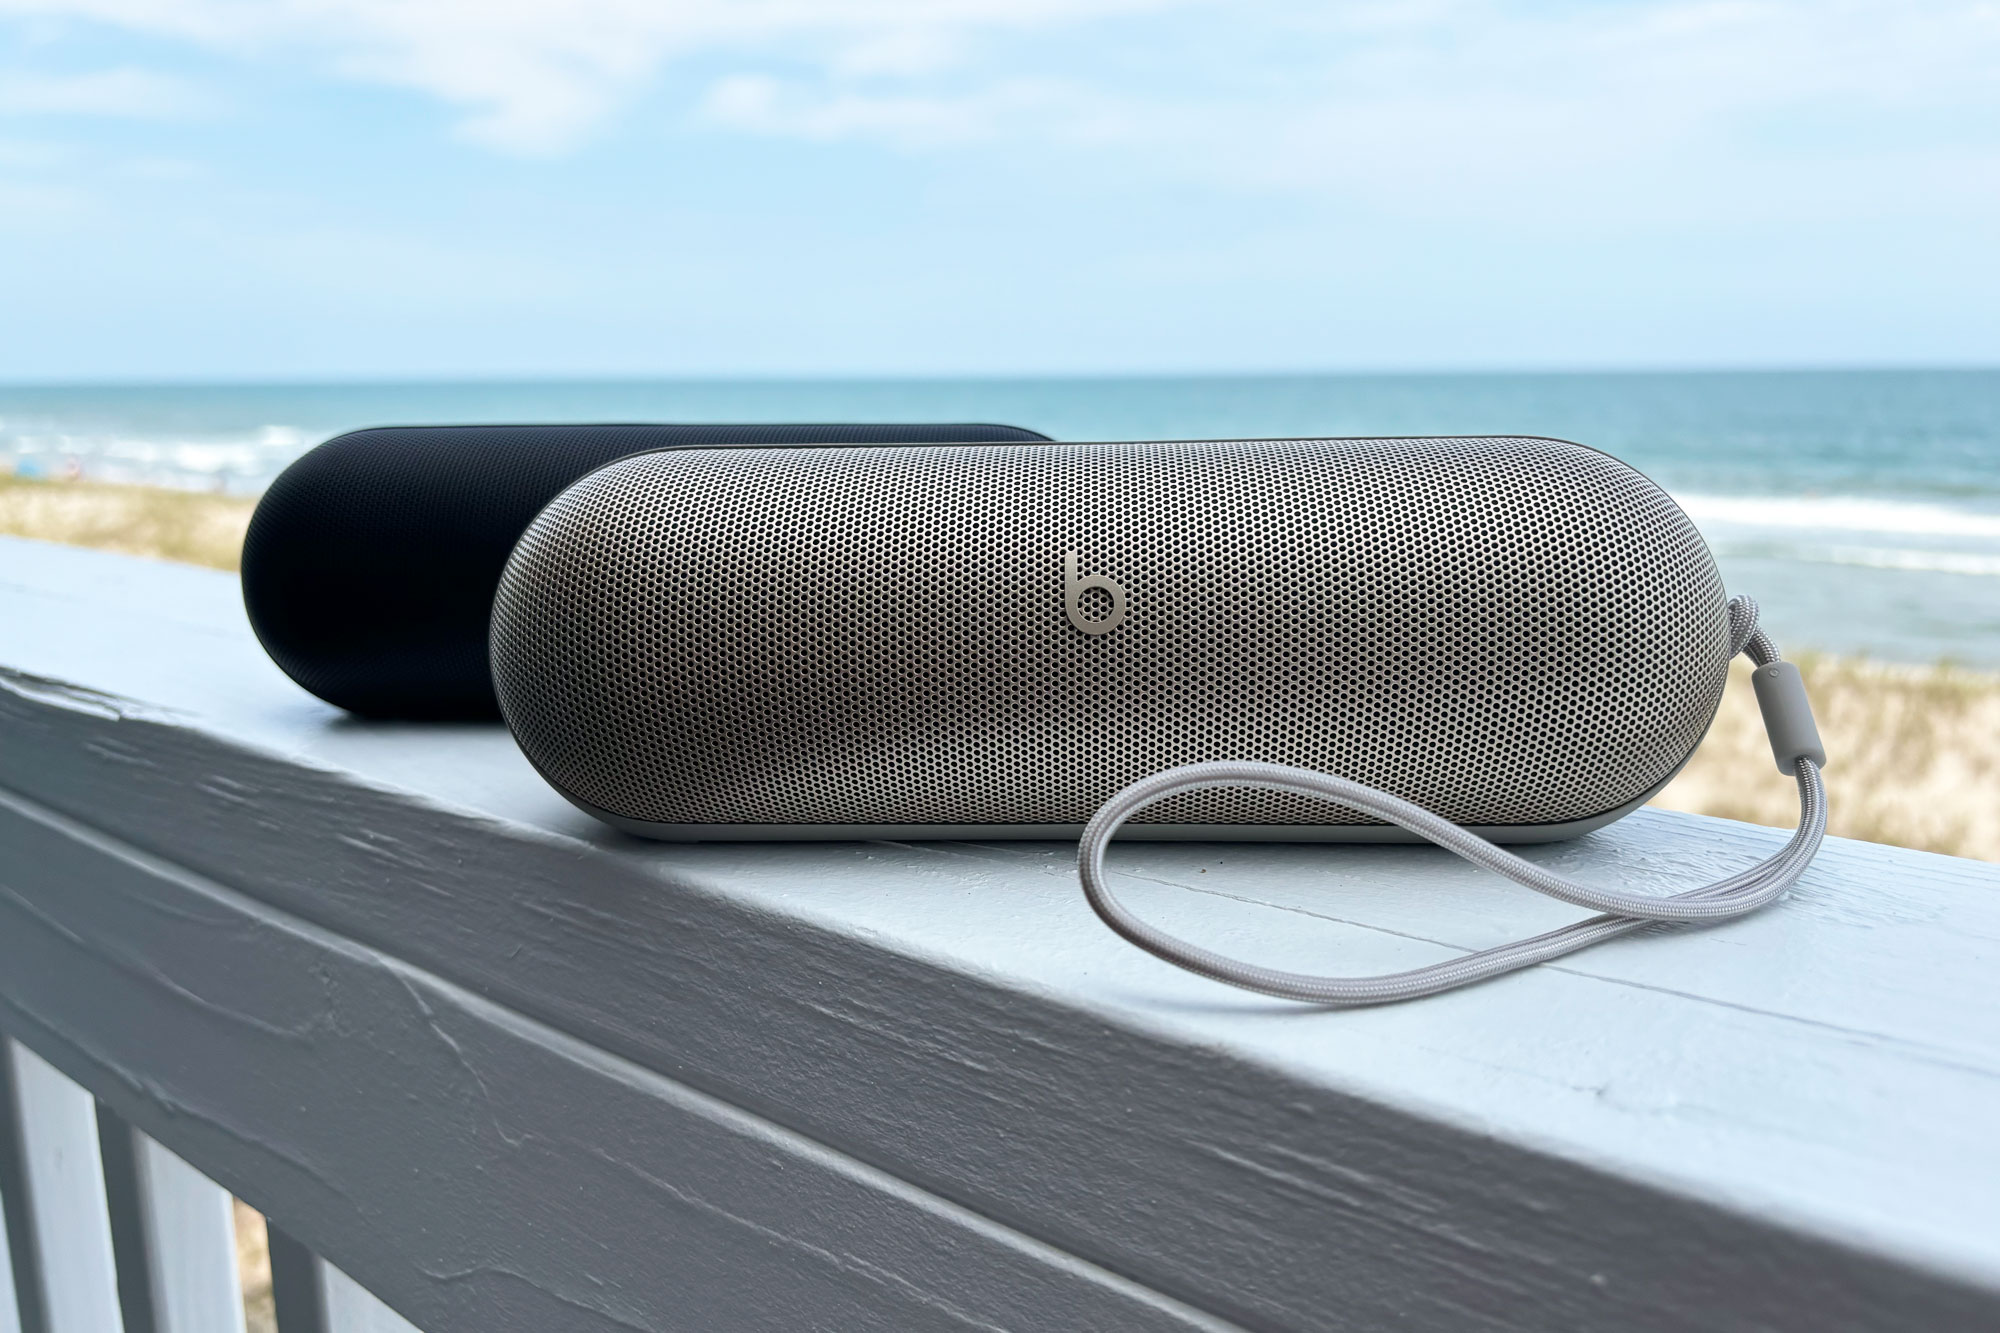 The redesigned Pill is rugged enough for a day at the beach or pool. 